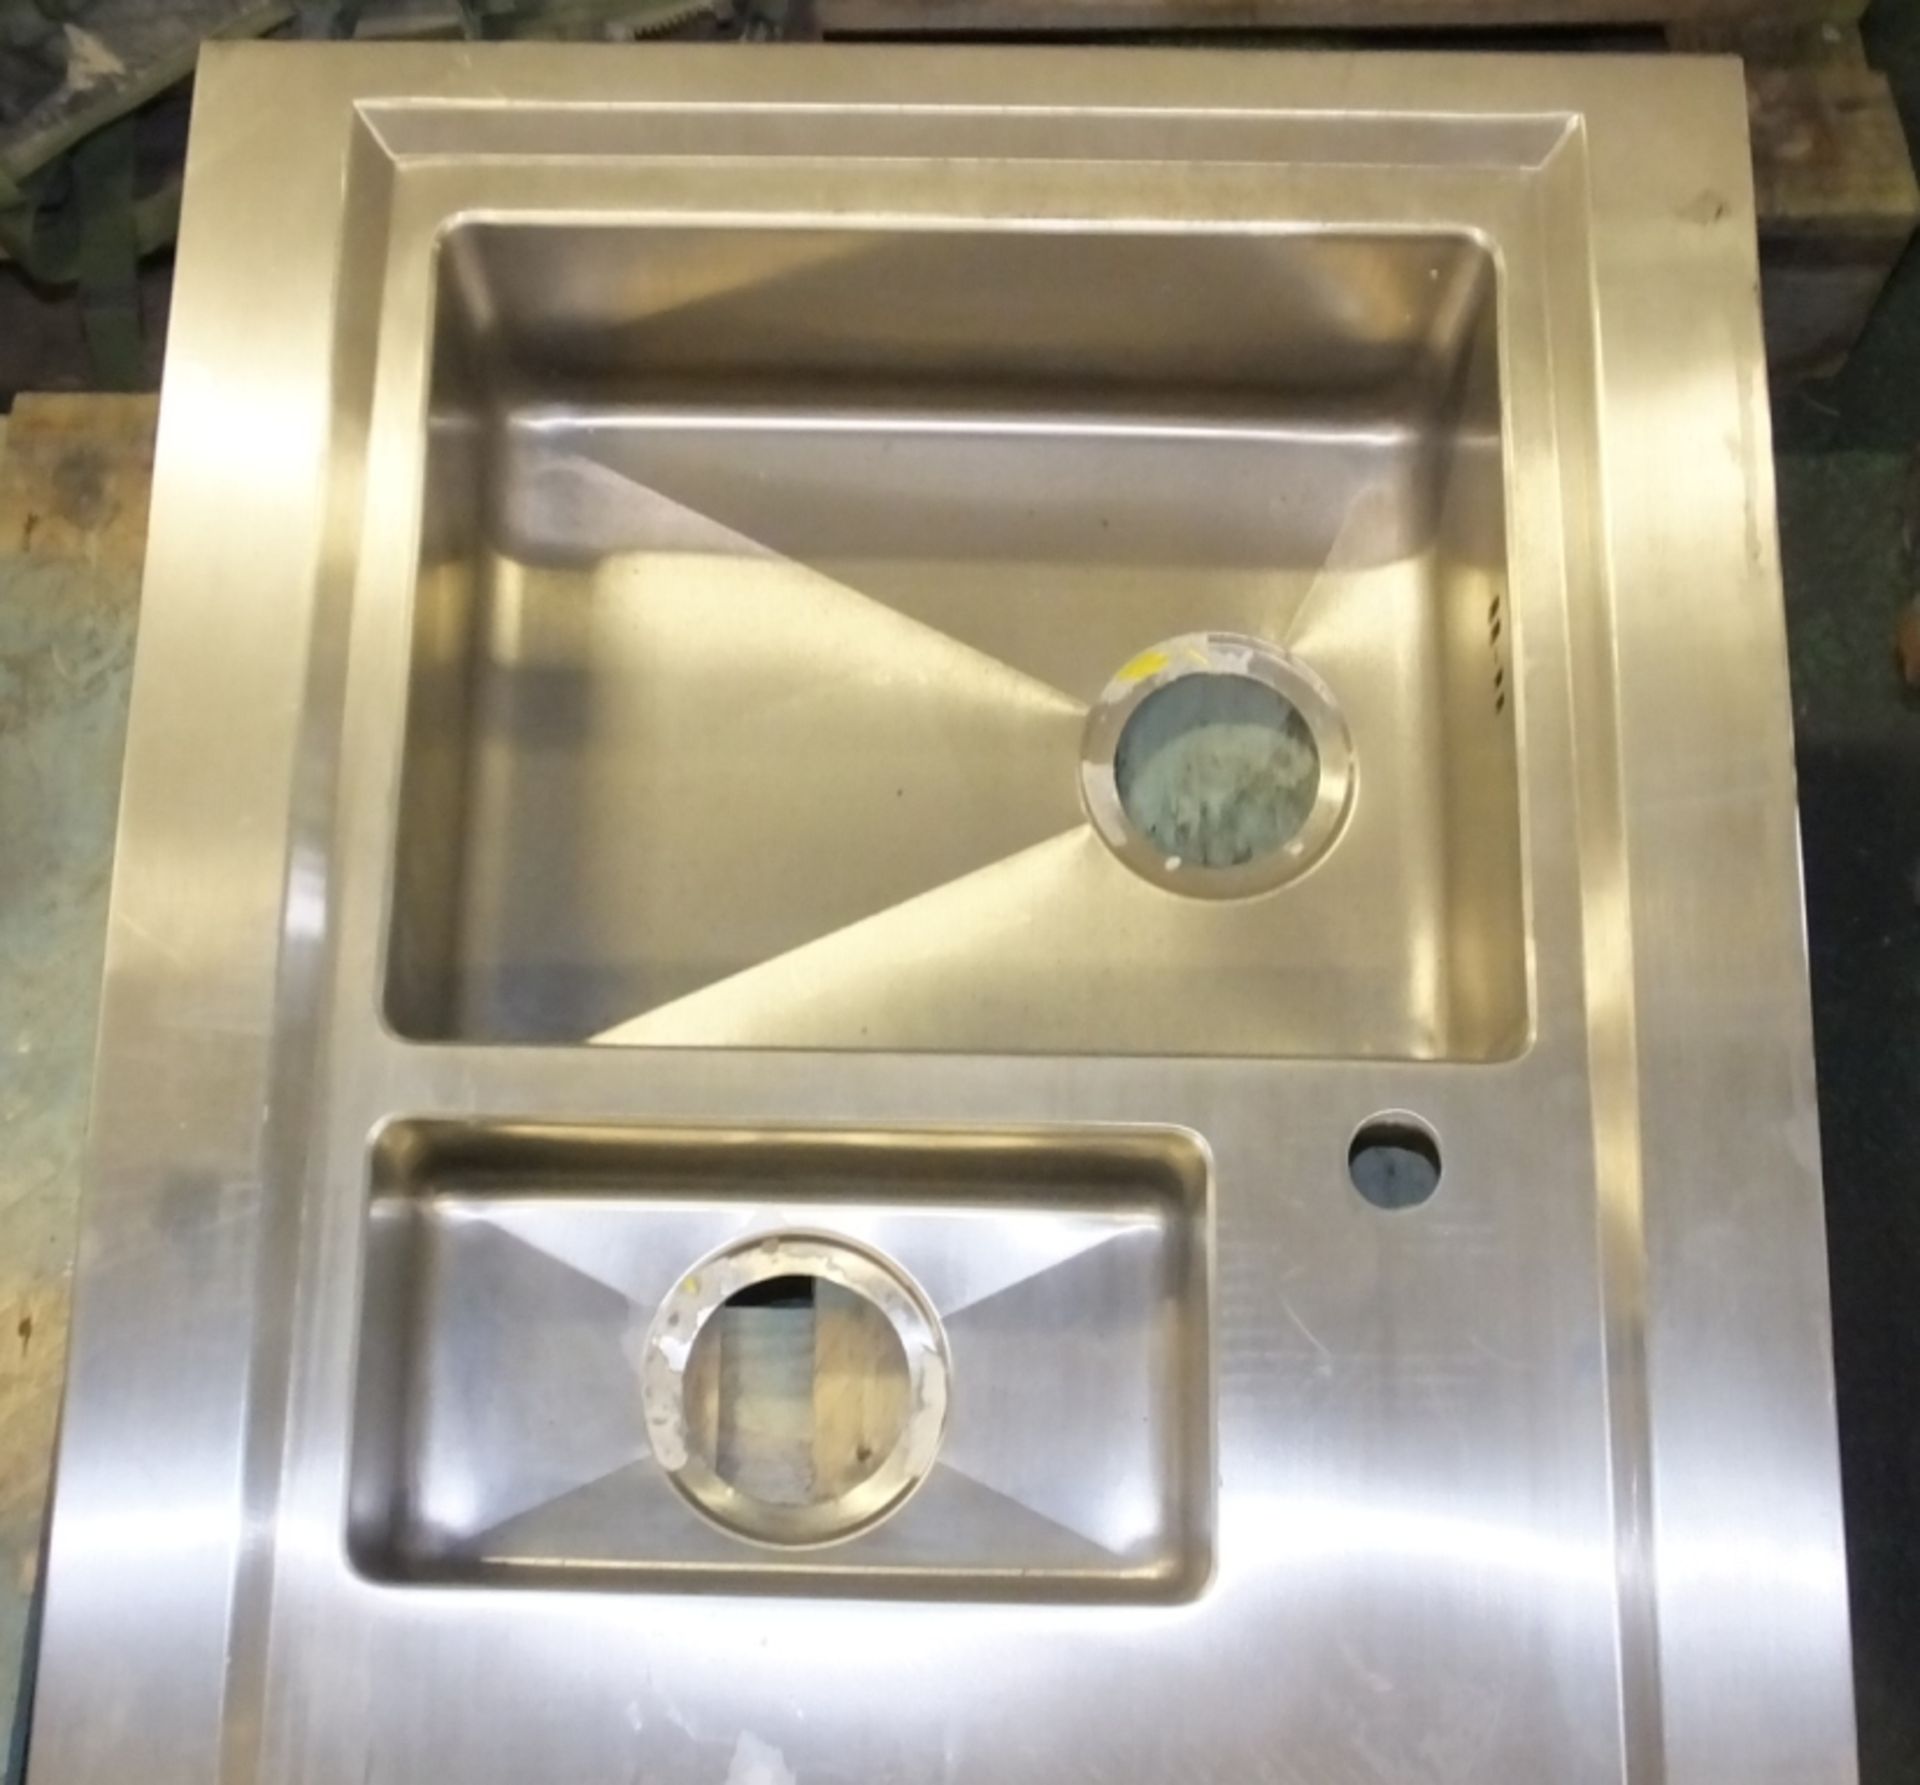 Stainless sink unit with centre drainer - 1000 x 620 - Image 2 of 2